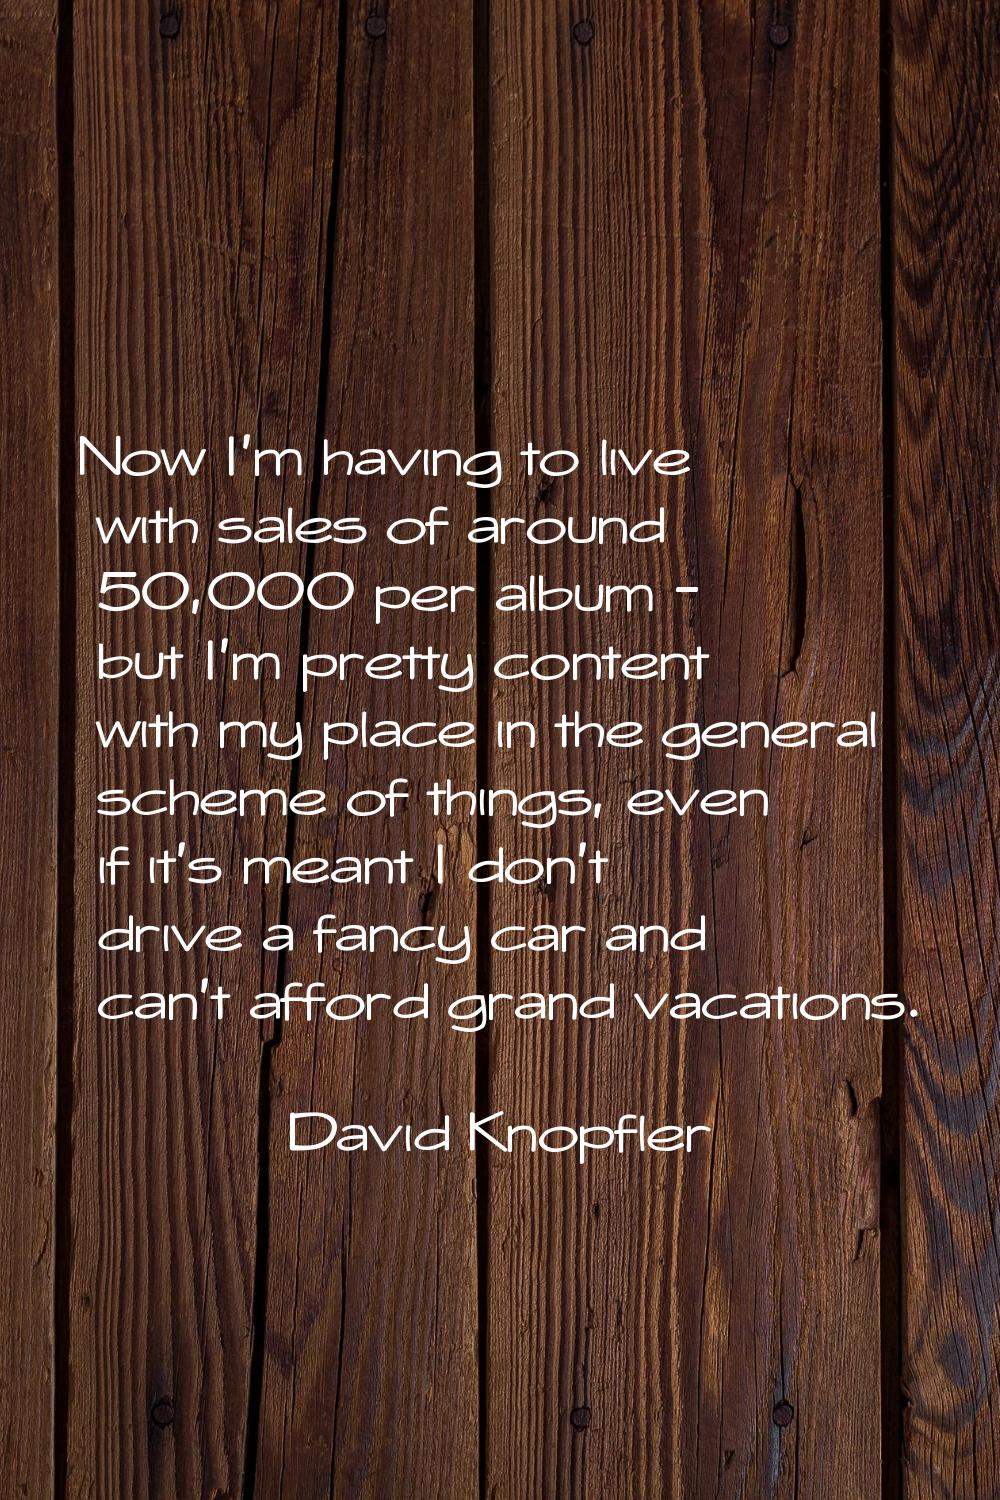 Now I'm having to live with sales of around 50,000 per album - but I'm pretty content with my place